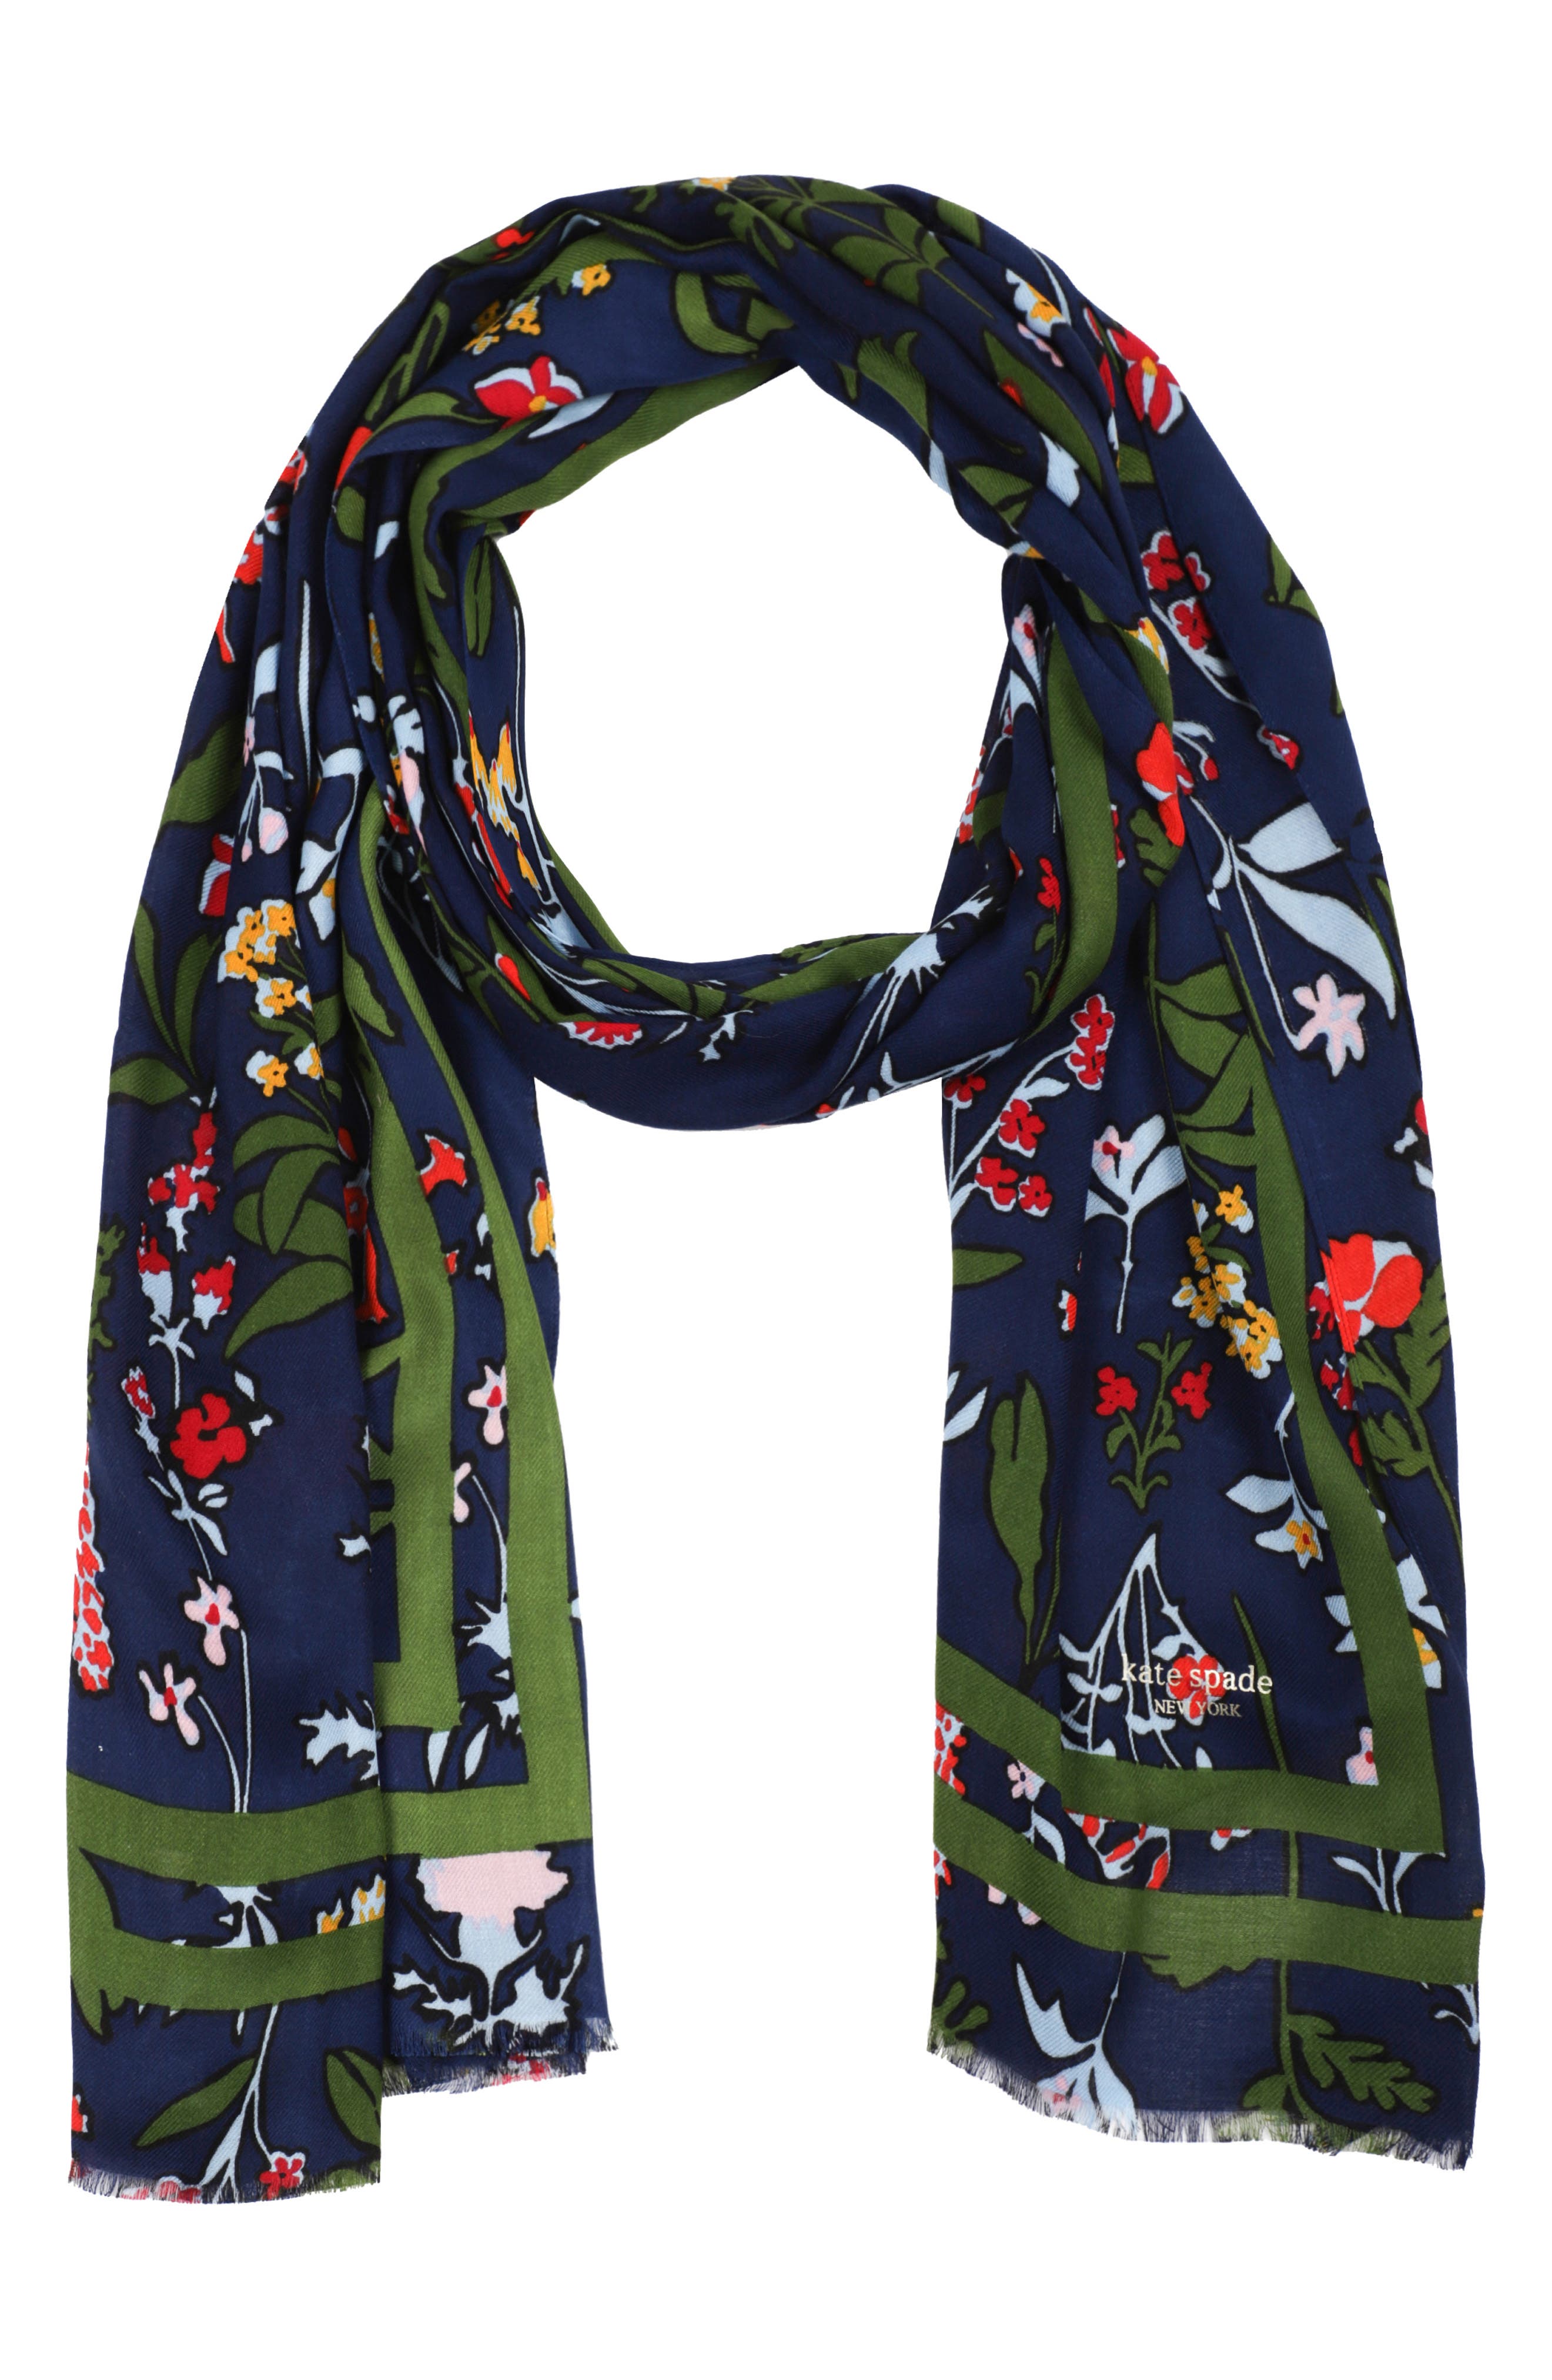 Rooftop Floral Spade Flower Silk Square Kate Spade Women Accessories Scarves 